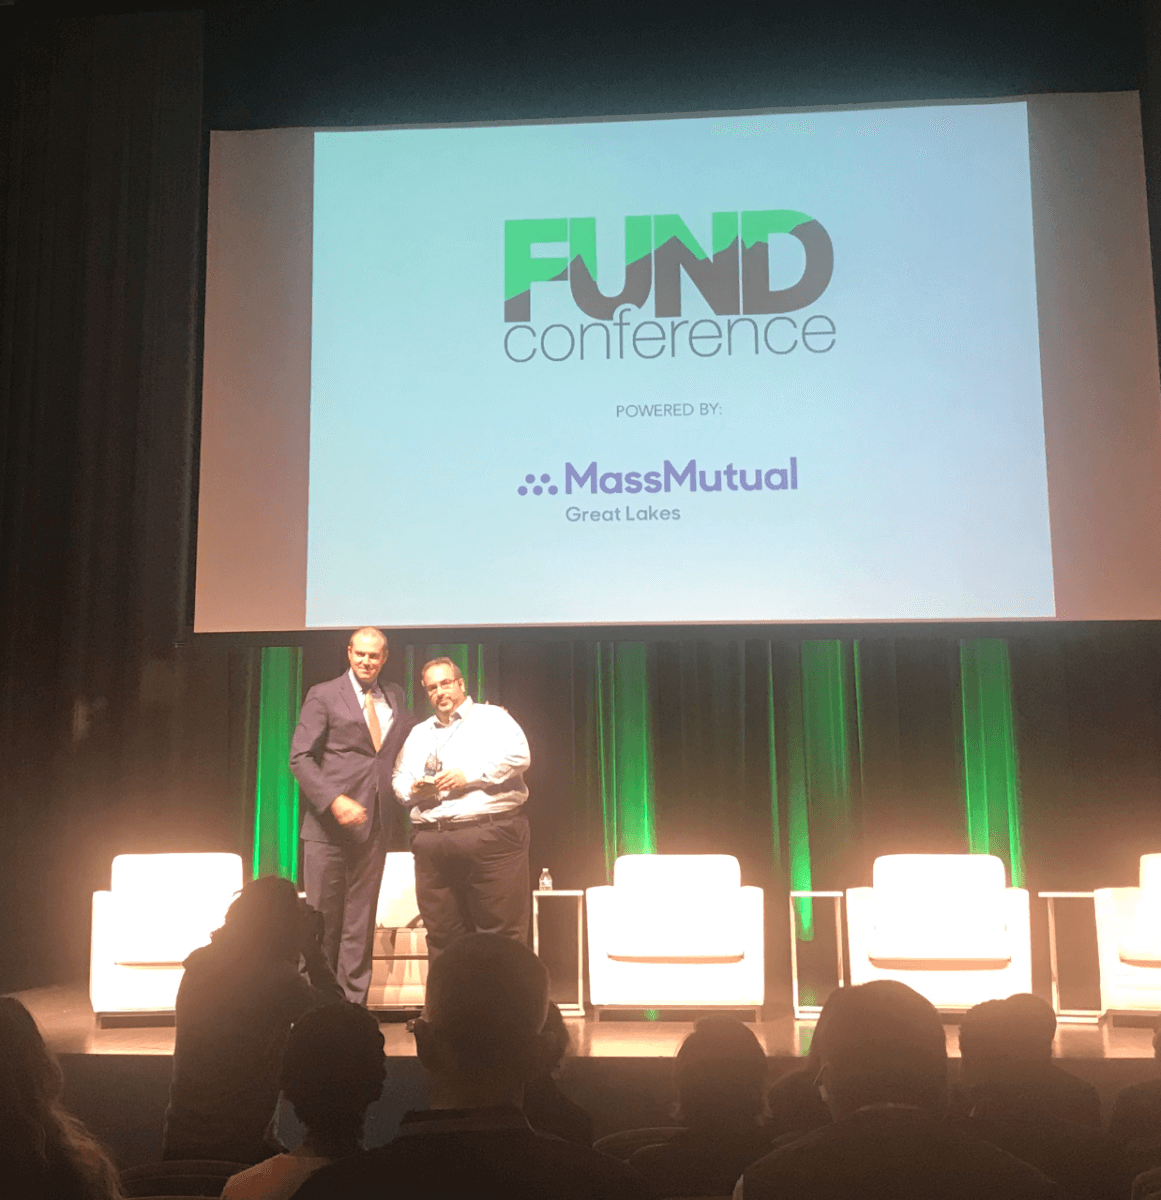 Tempesta Media Named Top Ten Start-Up by FUND Conference